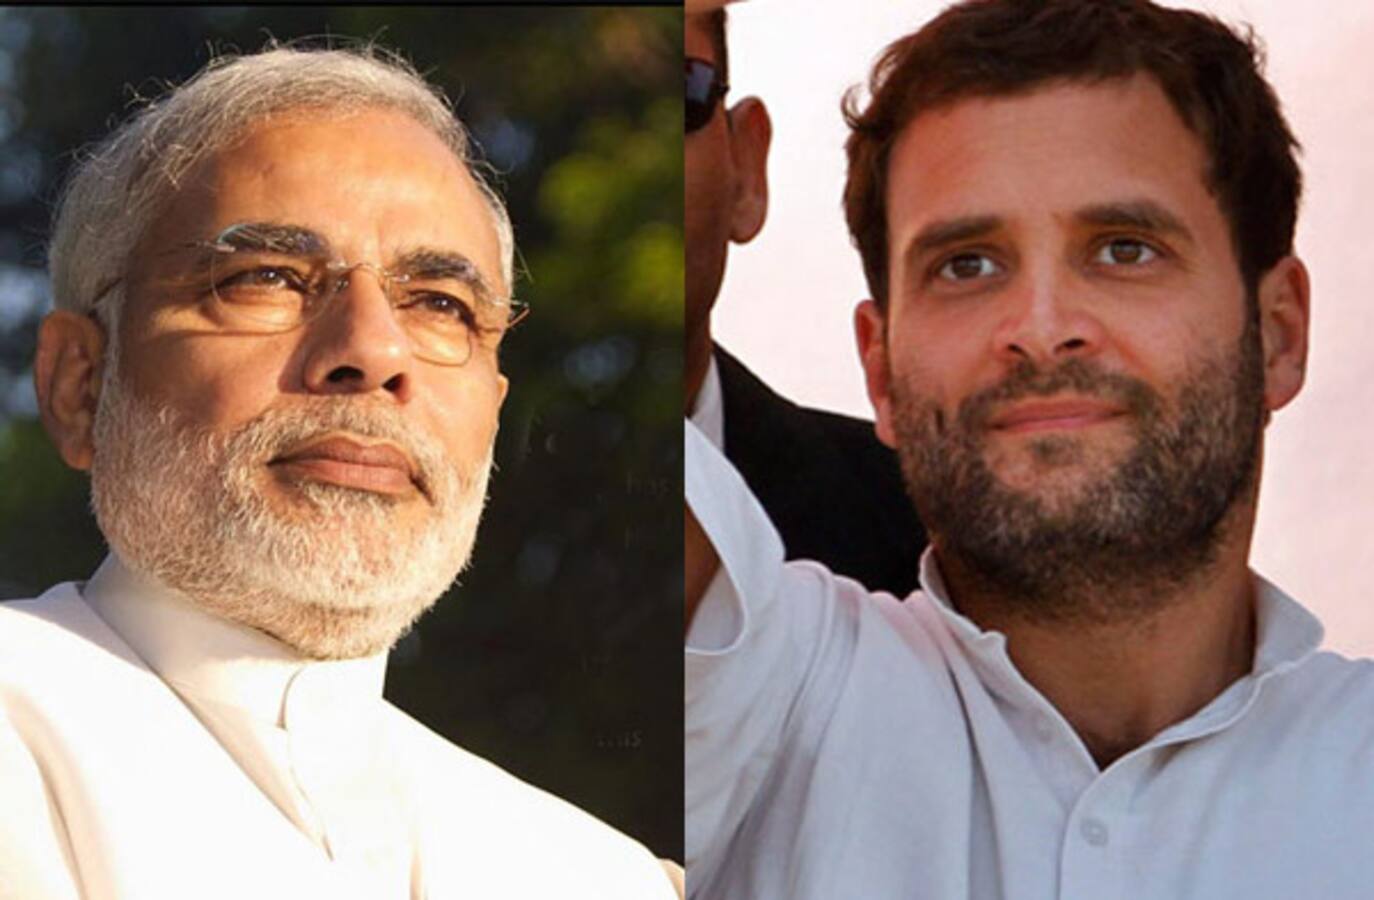 Narendra Modi and Rahul Gandhi: Cinema, television portray the leaders ahead of 2014 elections